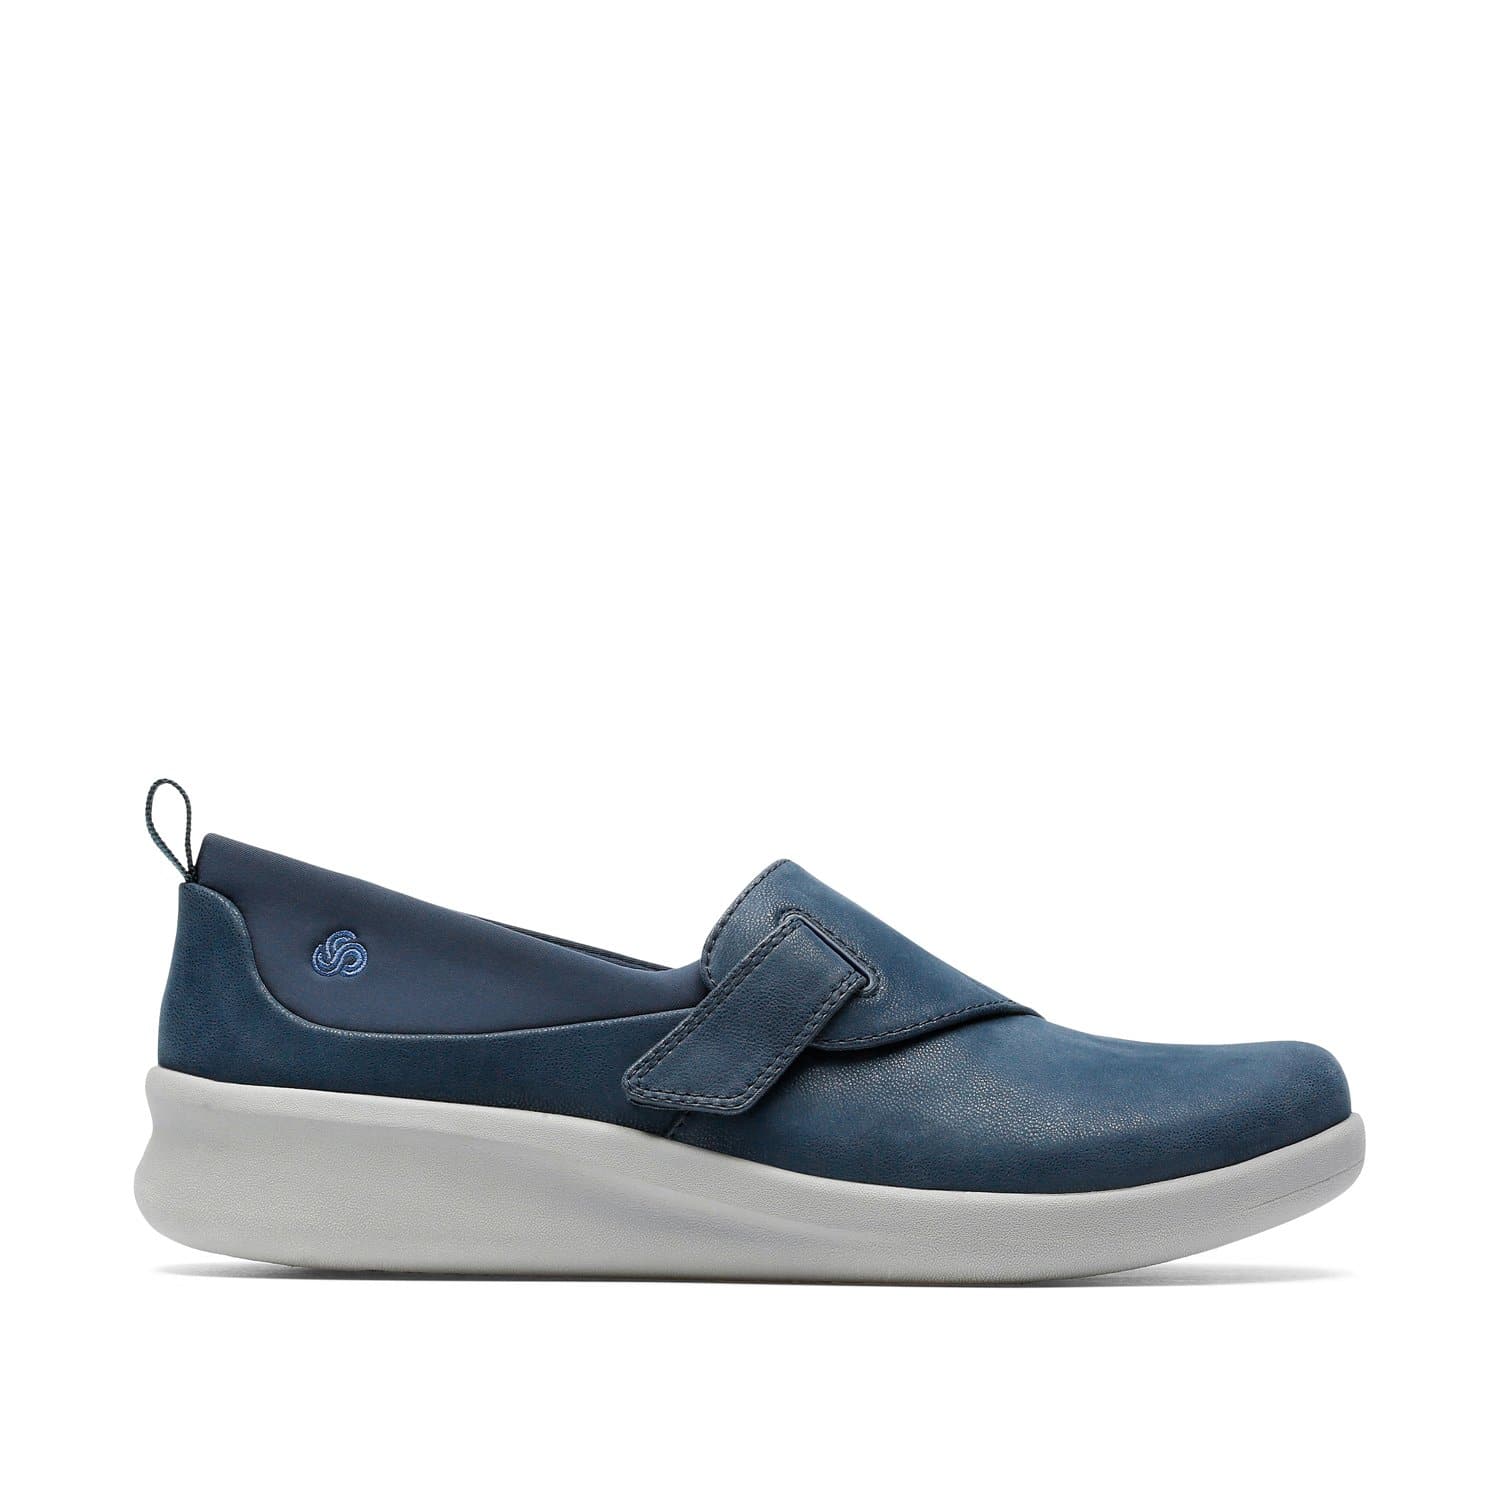 Clarks-Sillian2.0Ease-Women's-Shoes-Navy-Synthetic-26146970